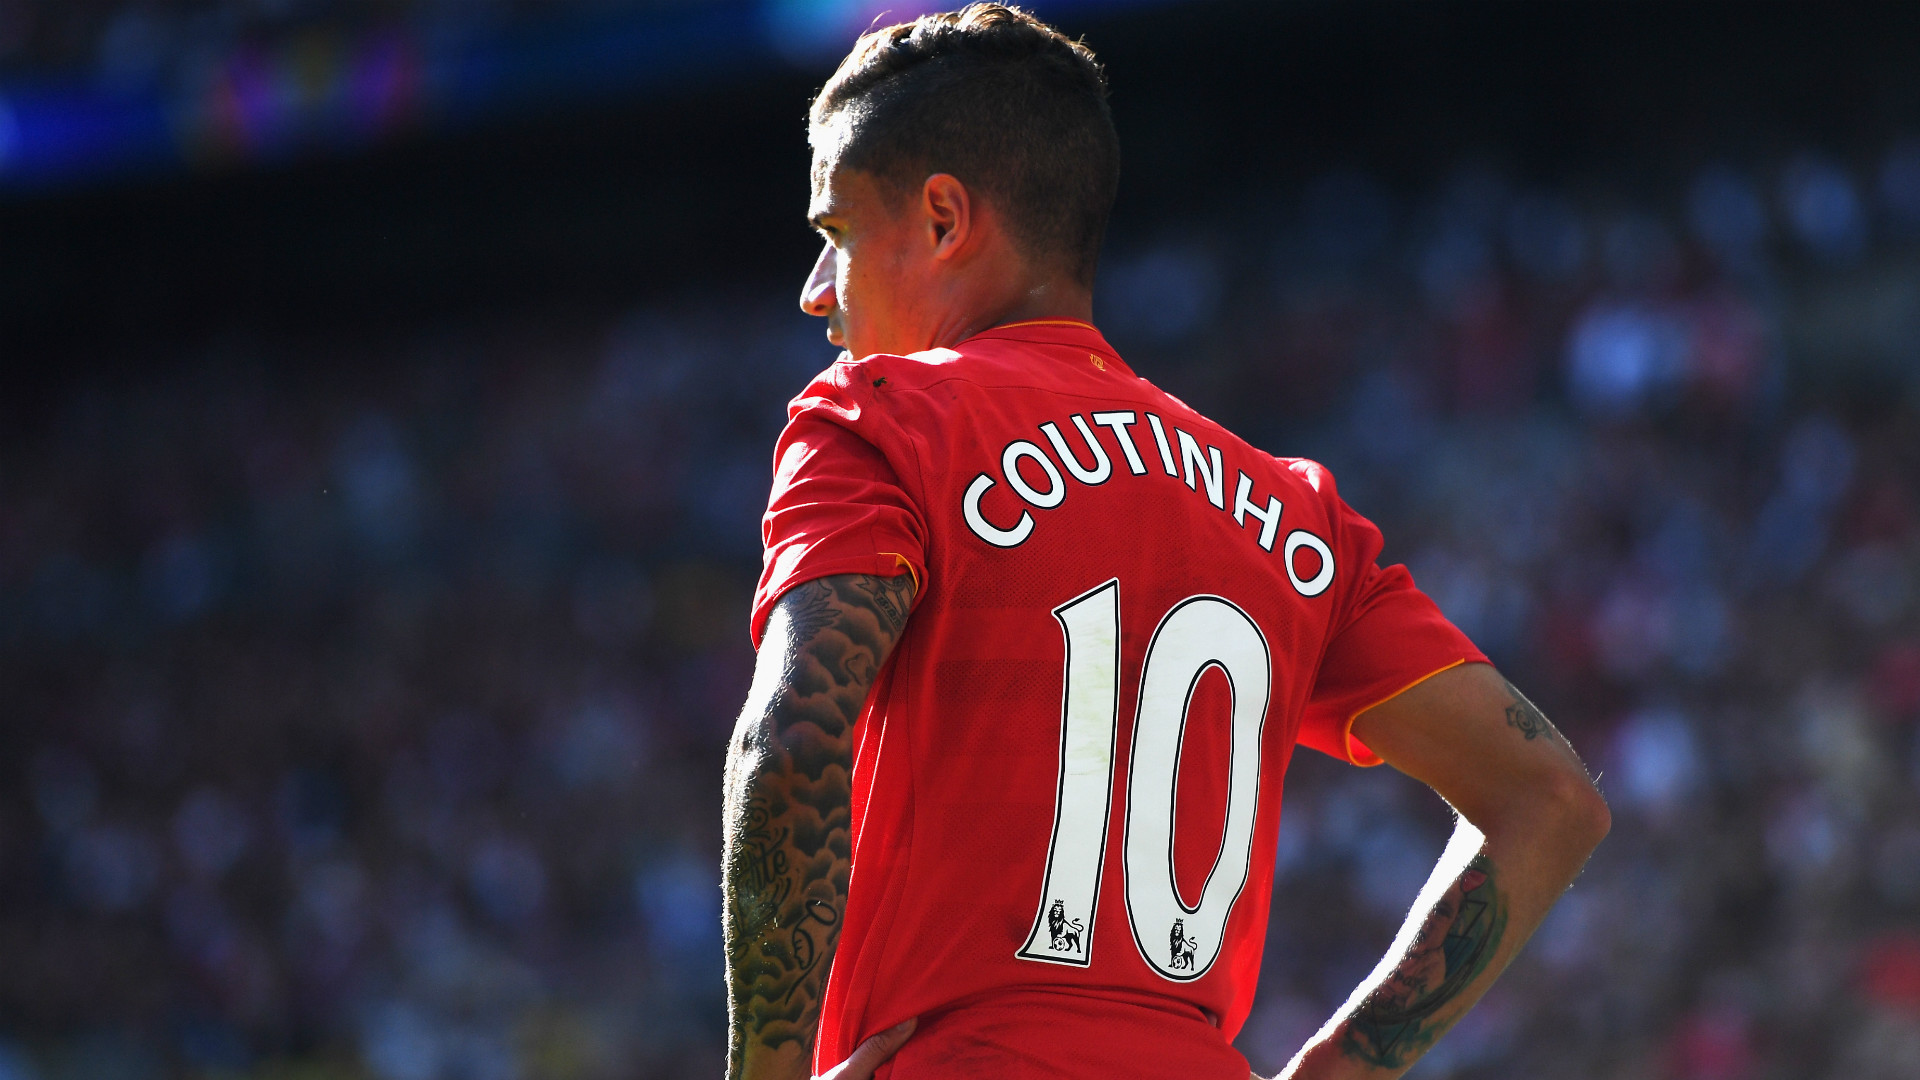 Barcelona to unveil Coutinho as Liverpool accepts €160m fee